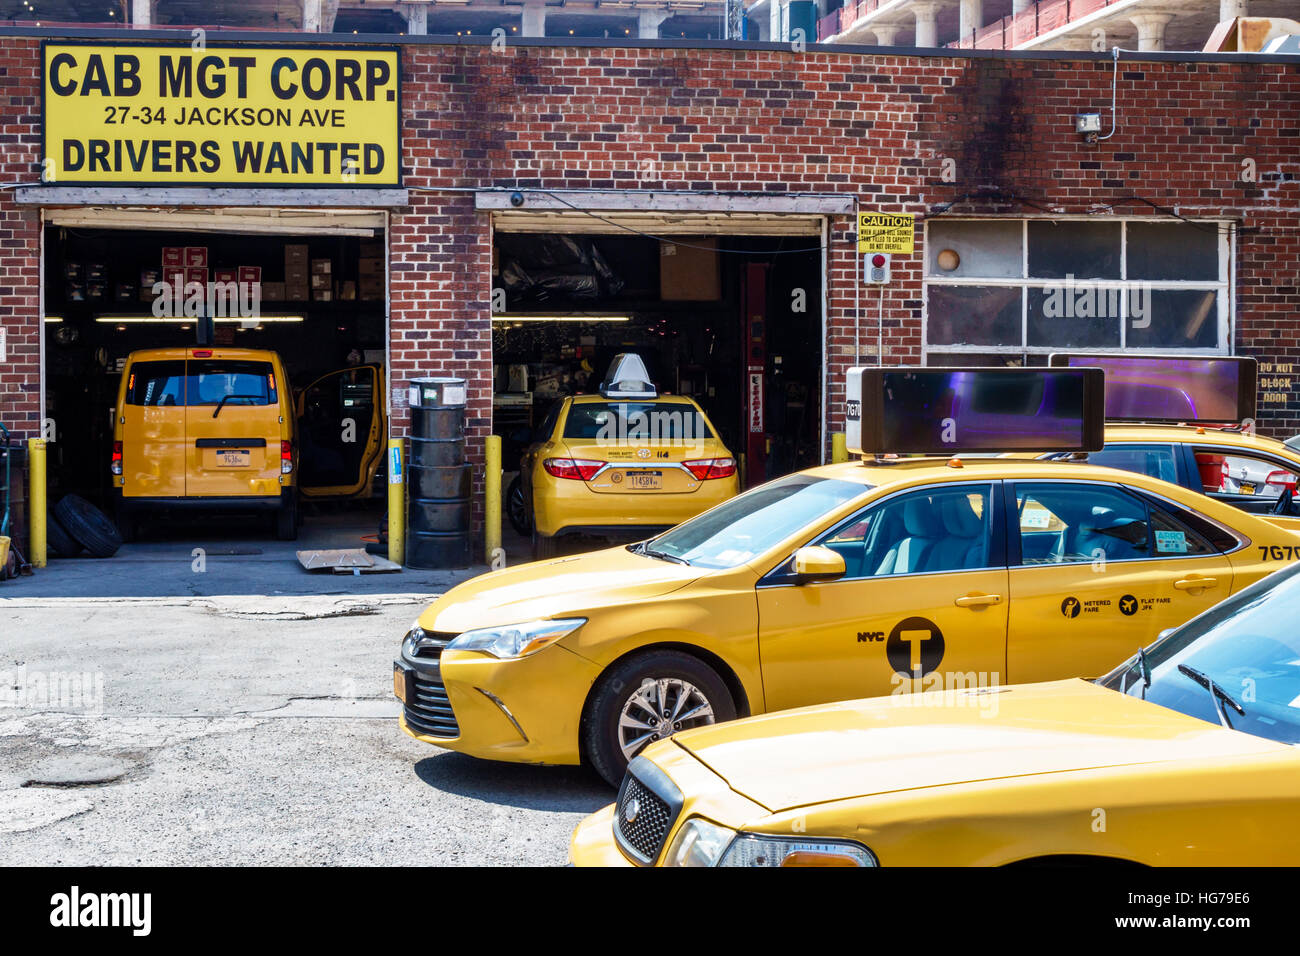 New York City,NY NYC Queens,Long Island City,Cab Management Corporation,taxi,garage,yard,repair,mechanic shop,drivers wanted,sign,yellow,cab,jobs,NY16 Stock Photo